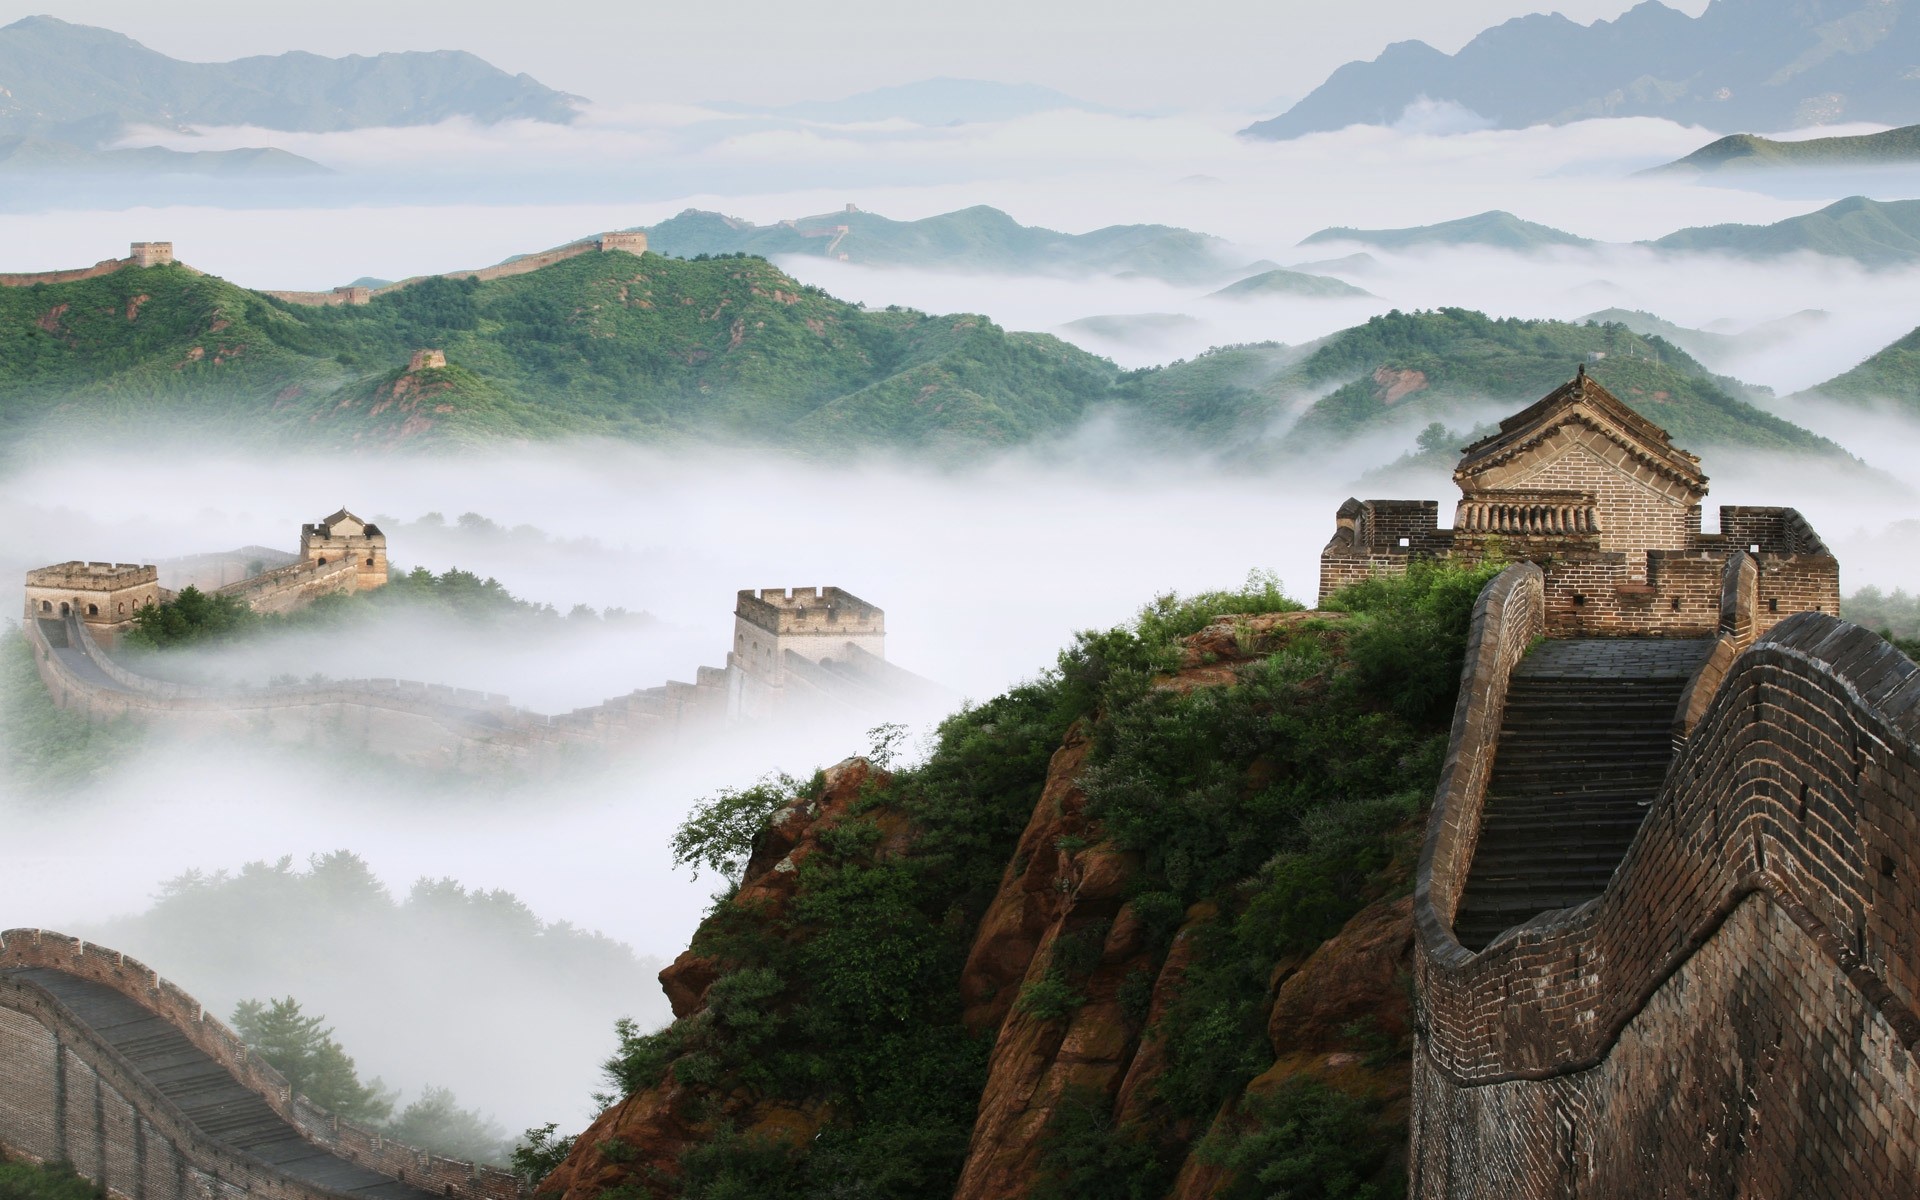 General 1920x1200 nature landscape trees China Great Wall of China hills mist rocks architecture tower bricks stairs forest Asia